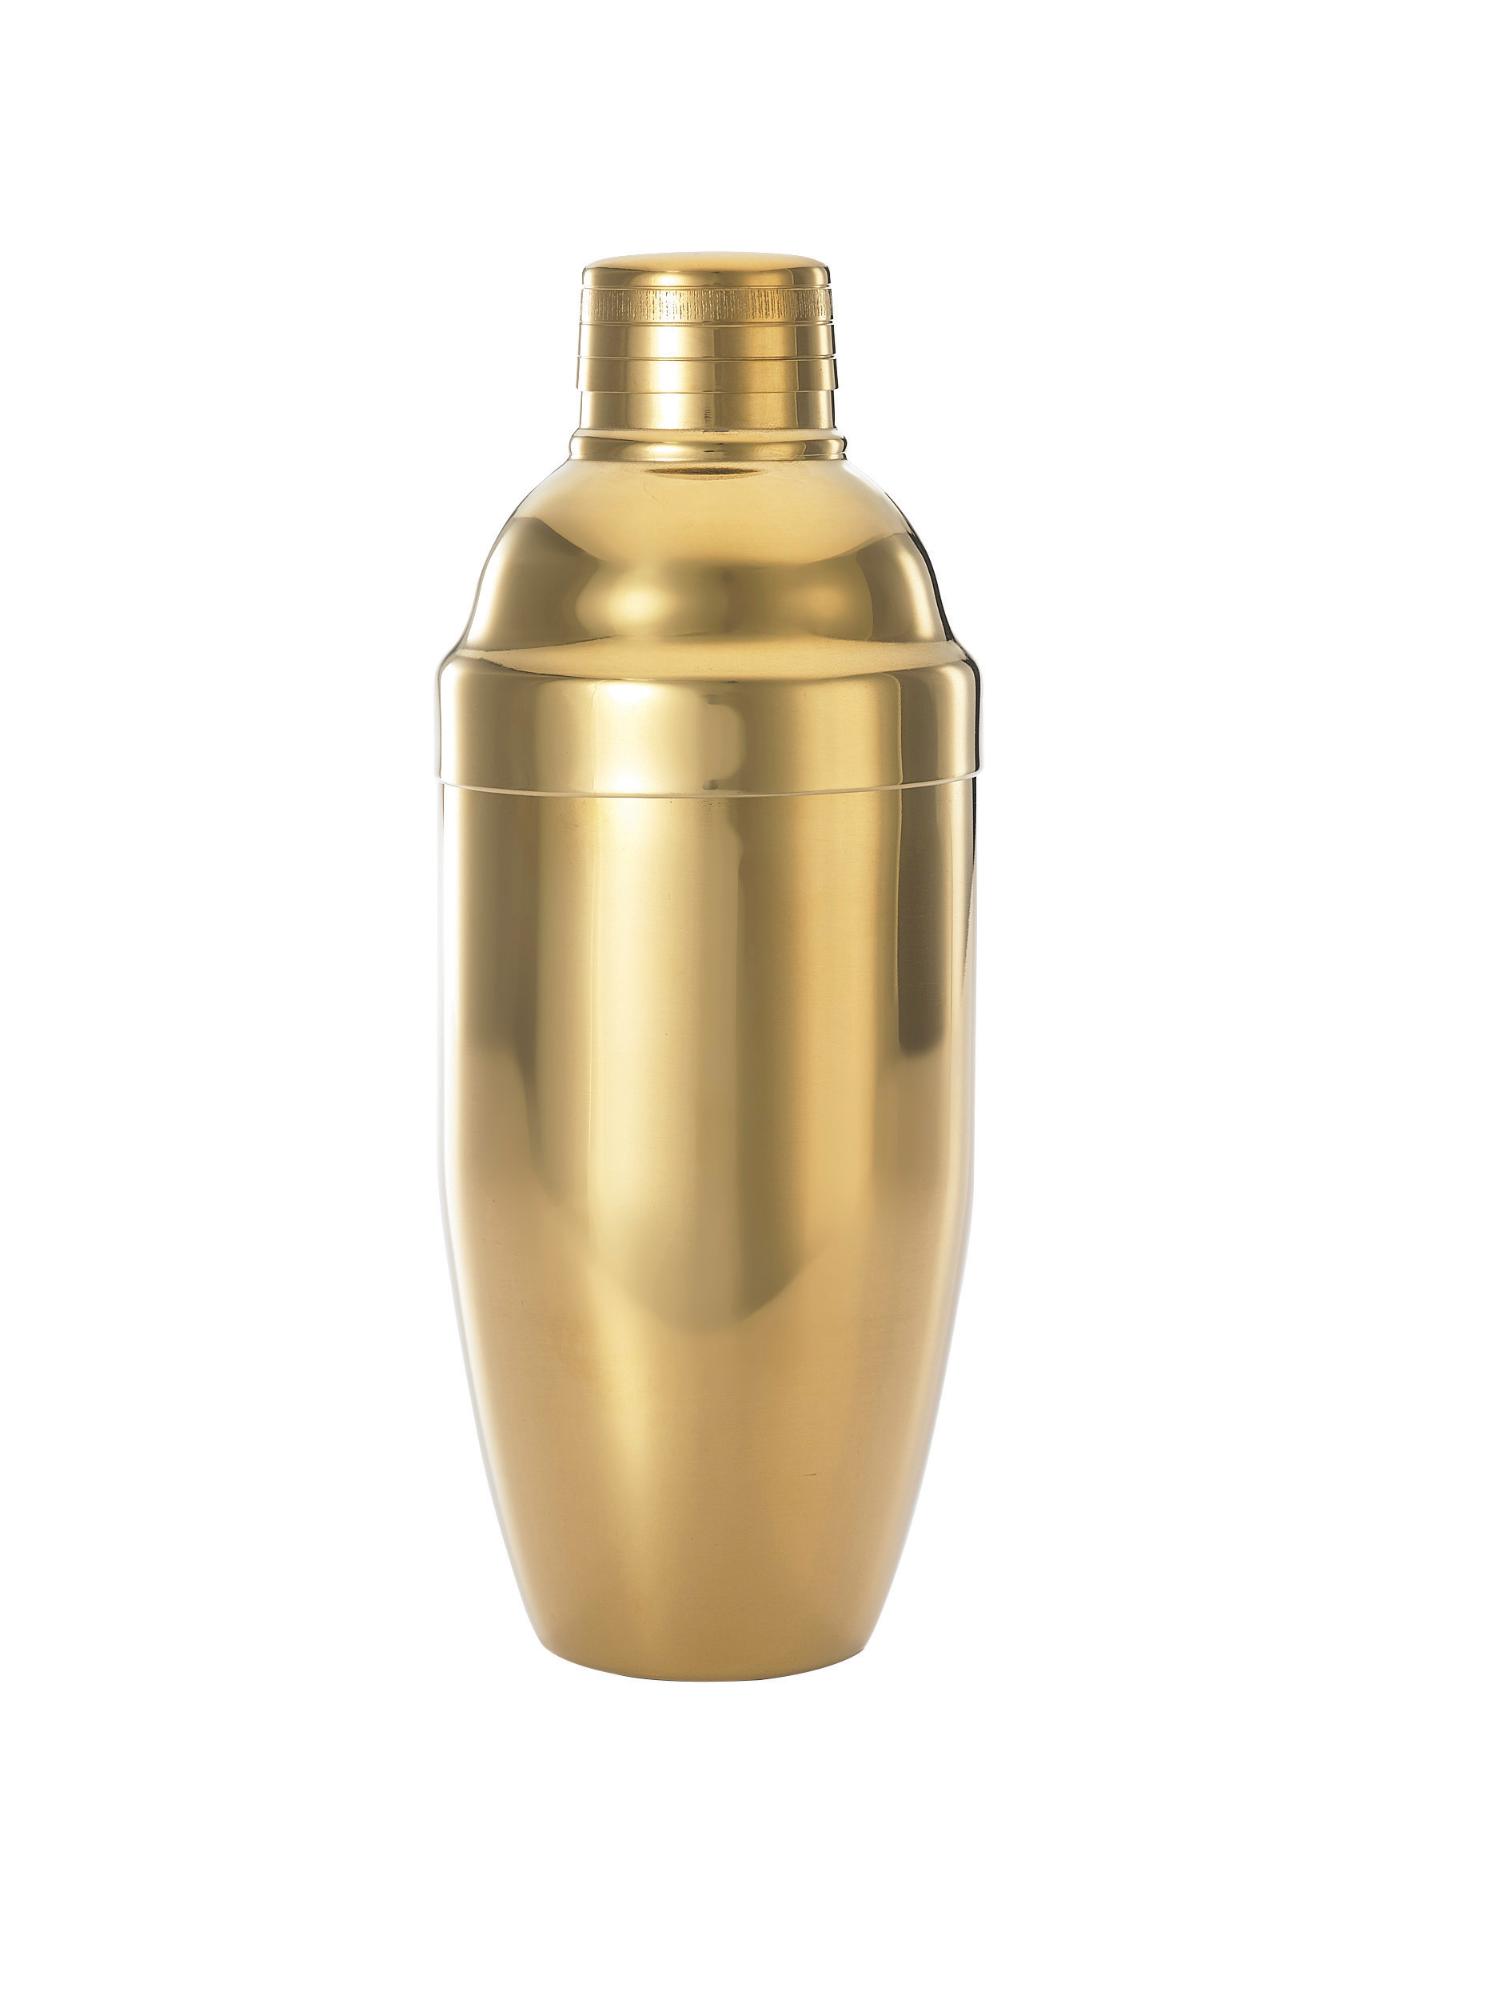 3-Pc Japanese Cocktail Shaker Set, Gold plated